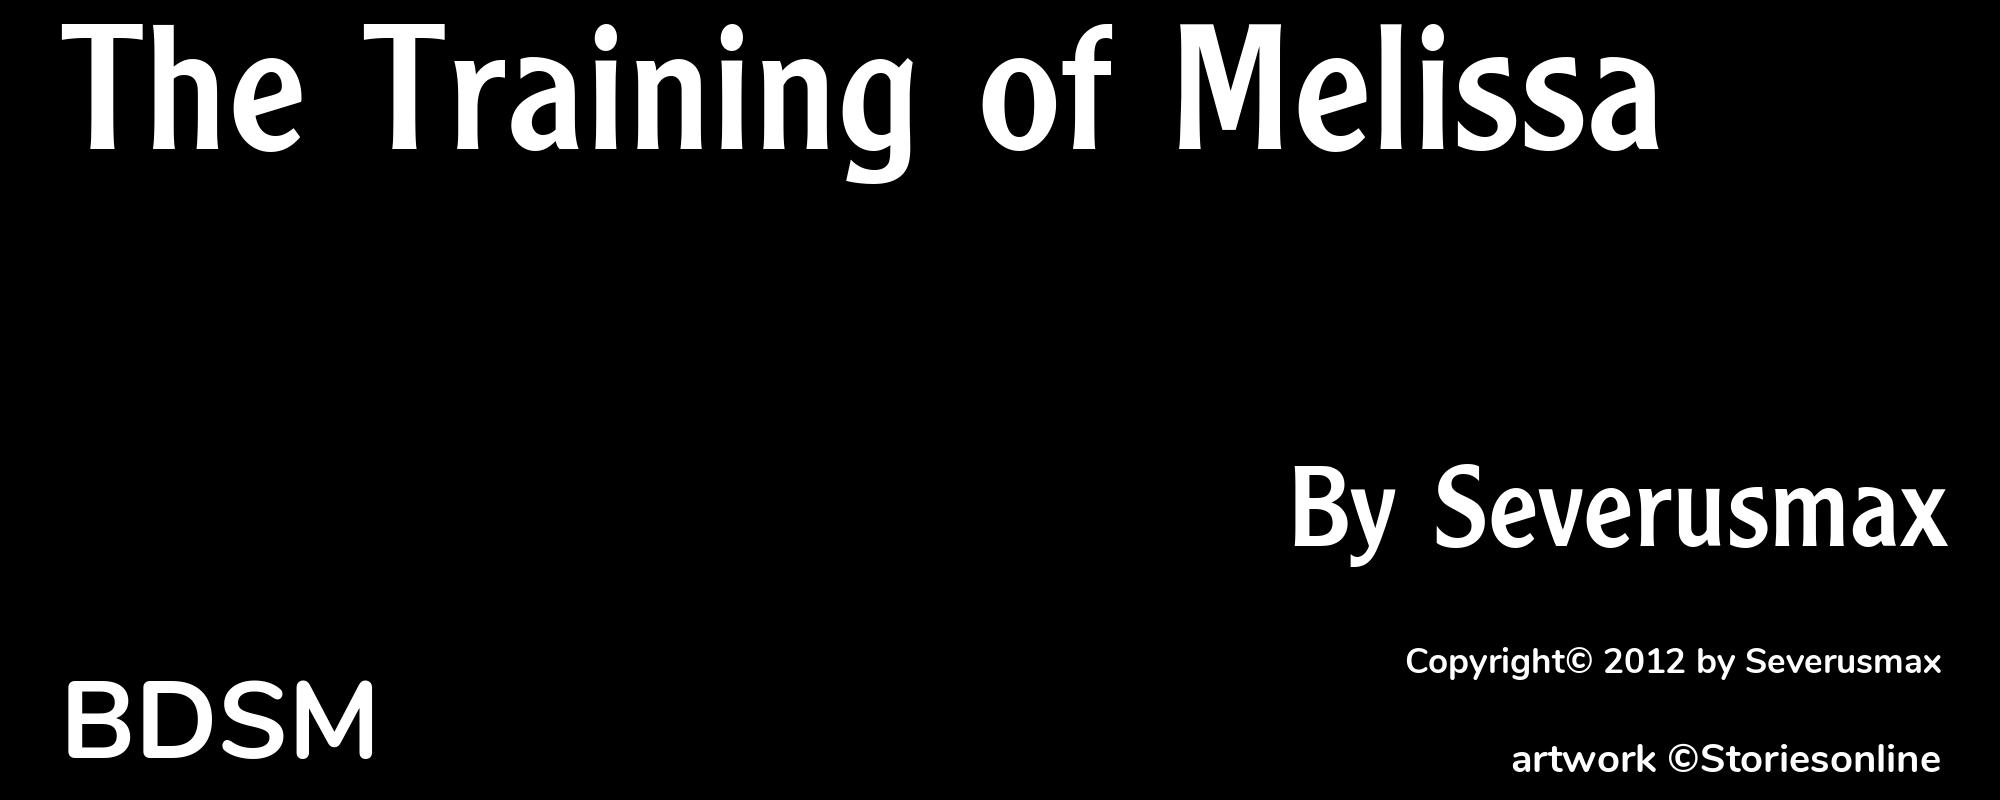 The Training of Melissa - Cover